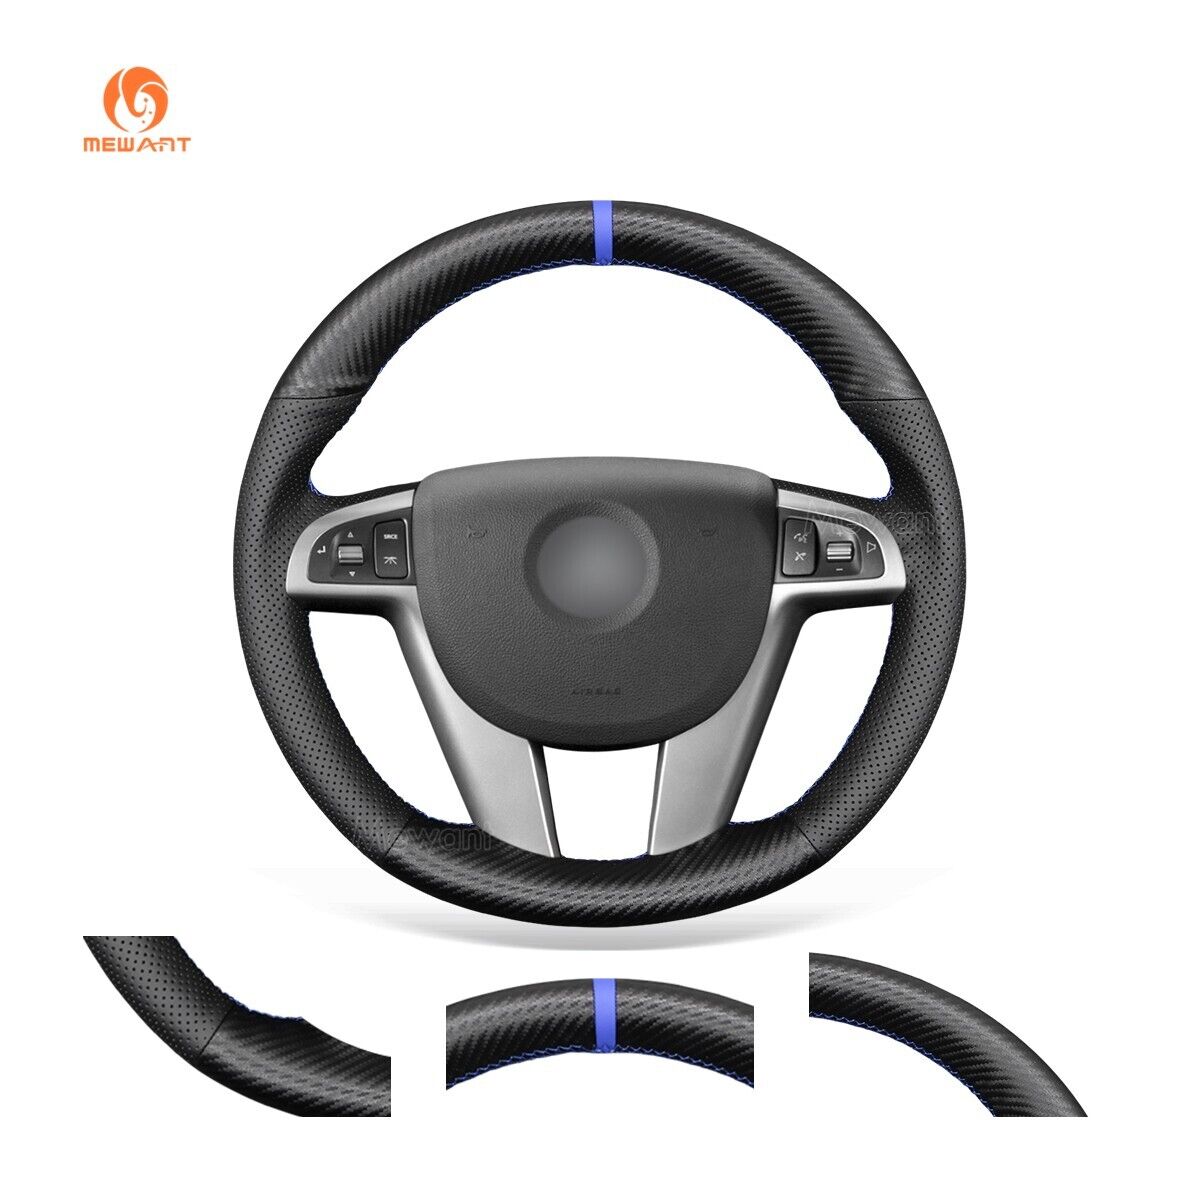 MEWANT PU Leather Carbon Fiber Steering Wheel Wrap for Holden Commodore Calais